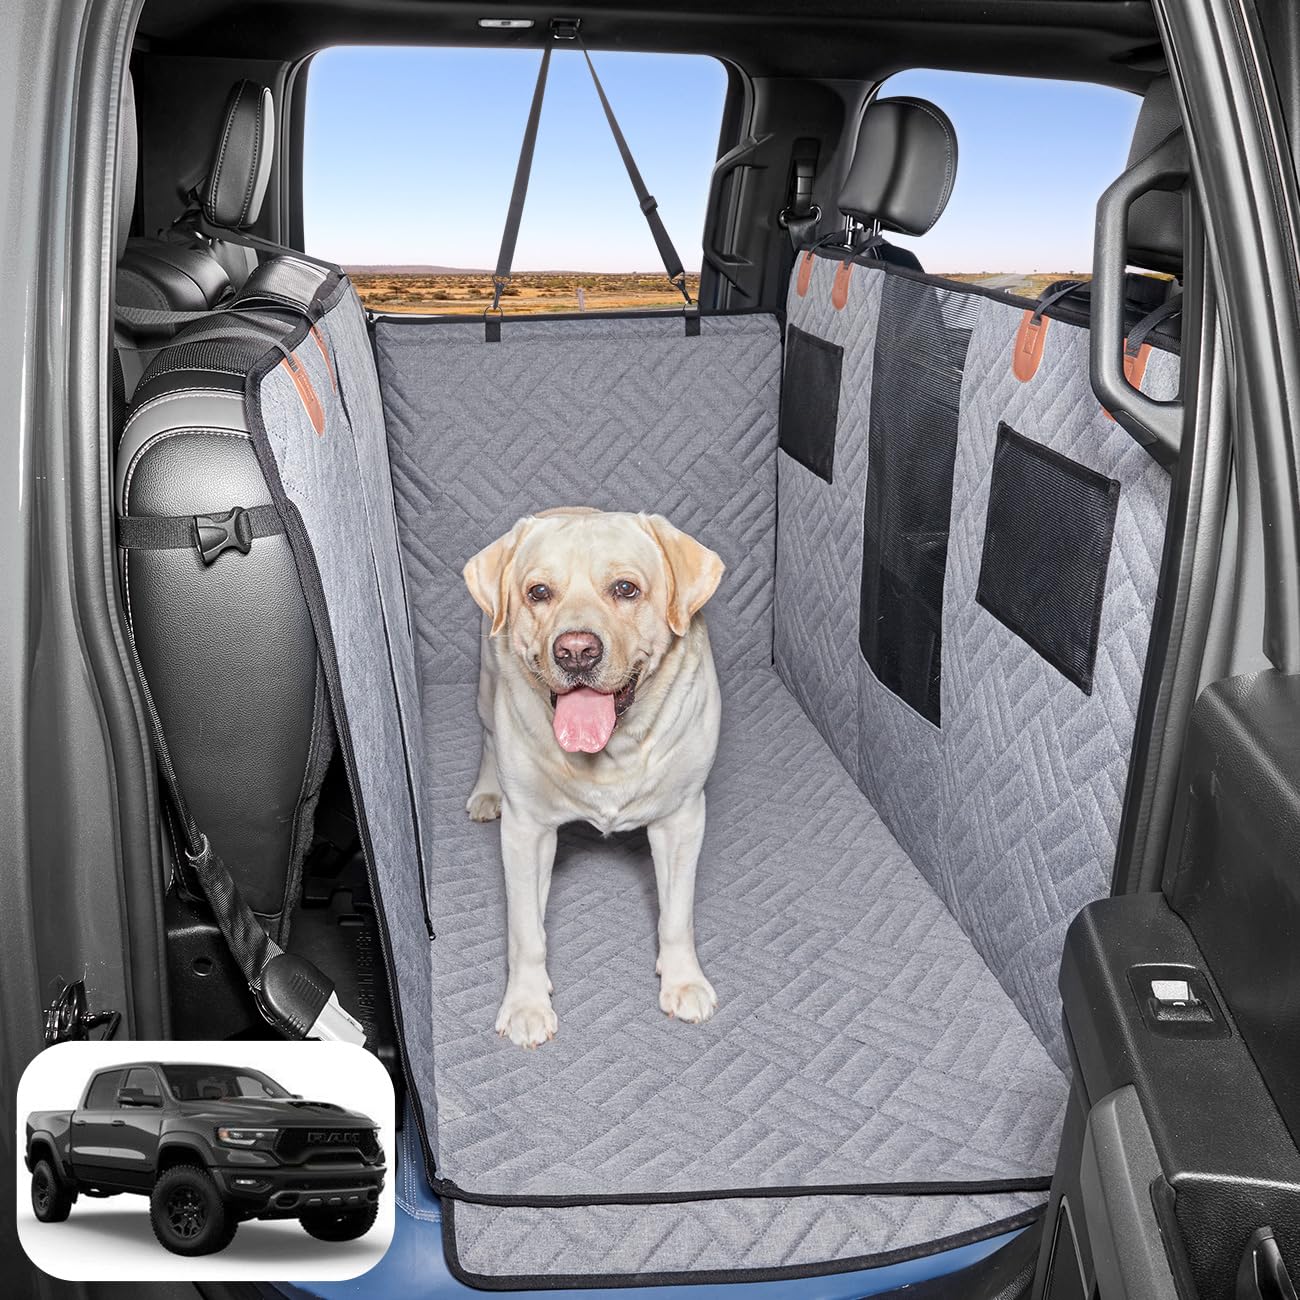 Dog Hammock for Truck,Back Seat Pet Cover for Dogs,Back Seat Extender for Truck F150 & F-Series, RAM1500